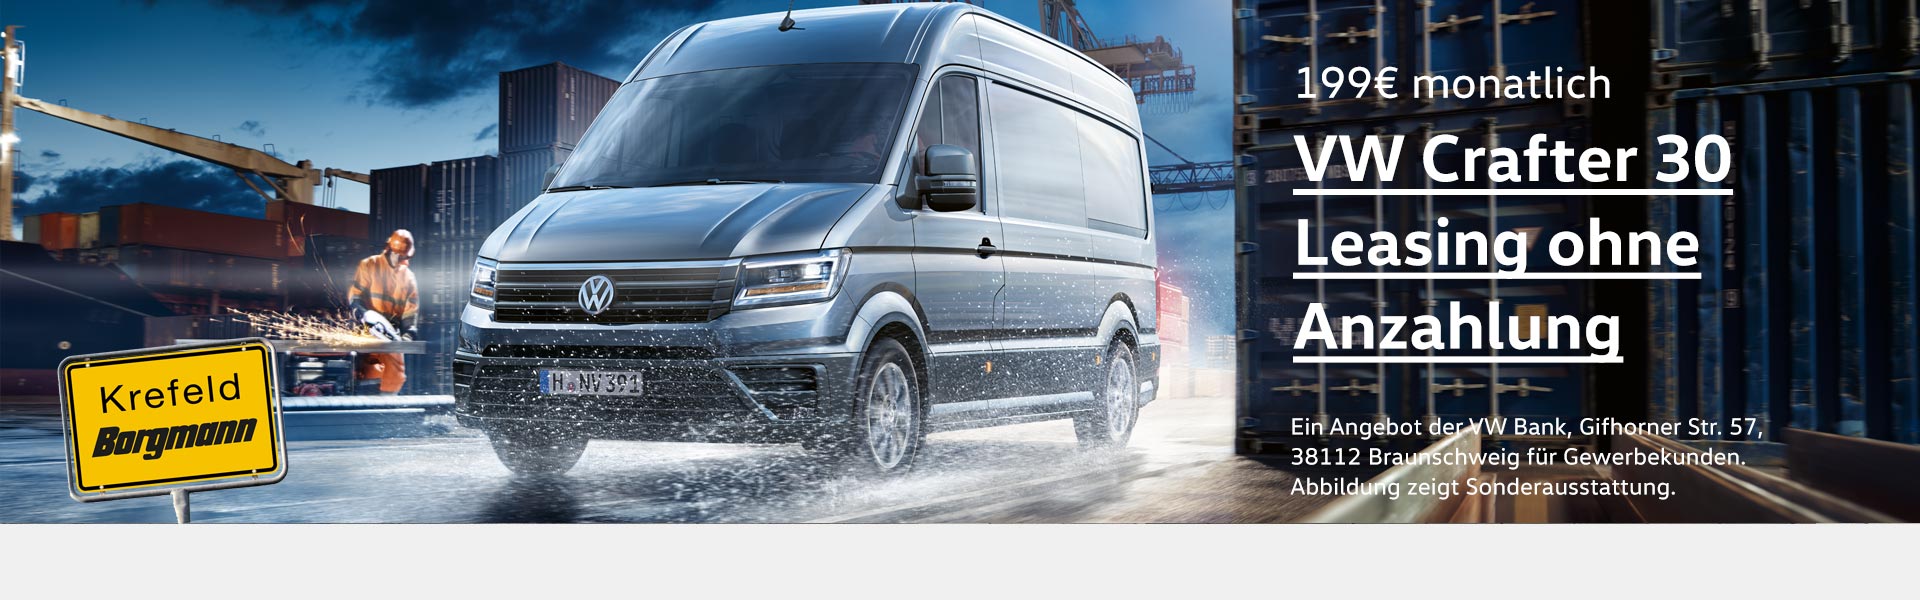 VW Crafter Leasing 199 Euro